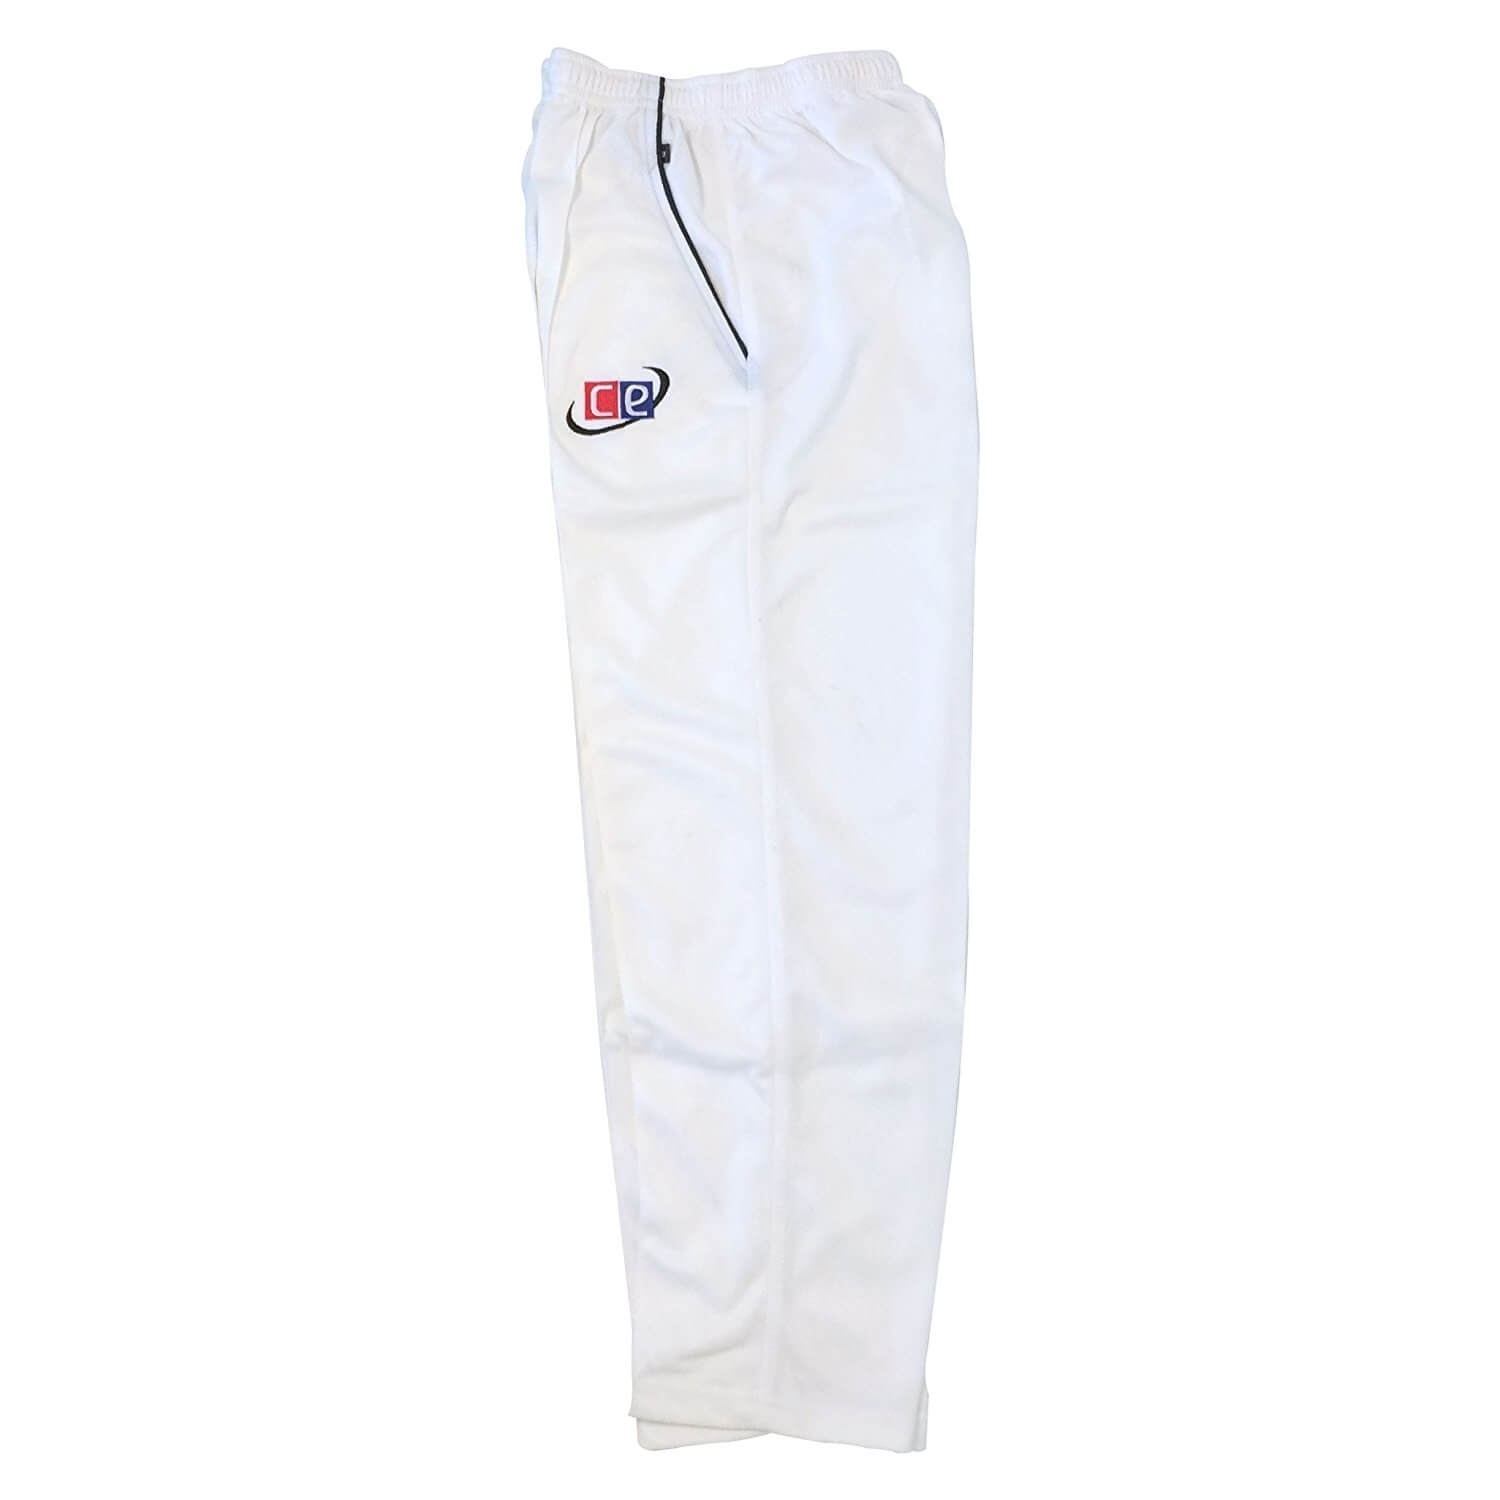 Cricket Whites Pants By Cricket Equipment USA - Free Ground Shipping ...